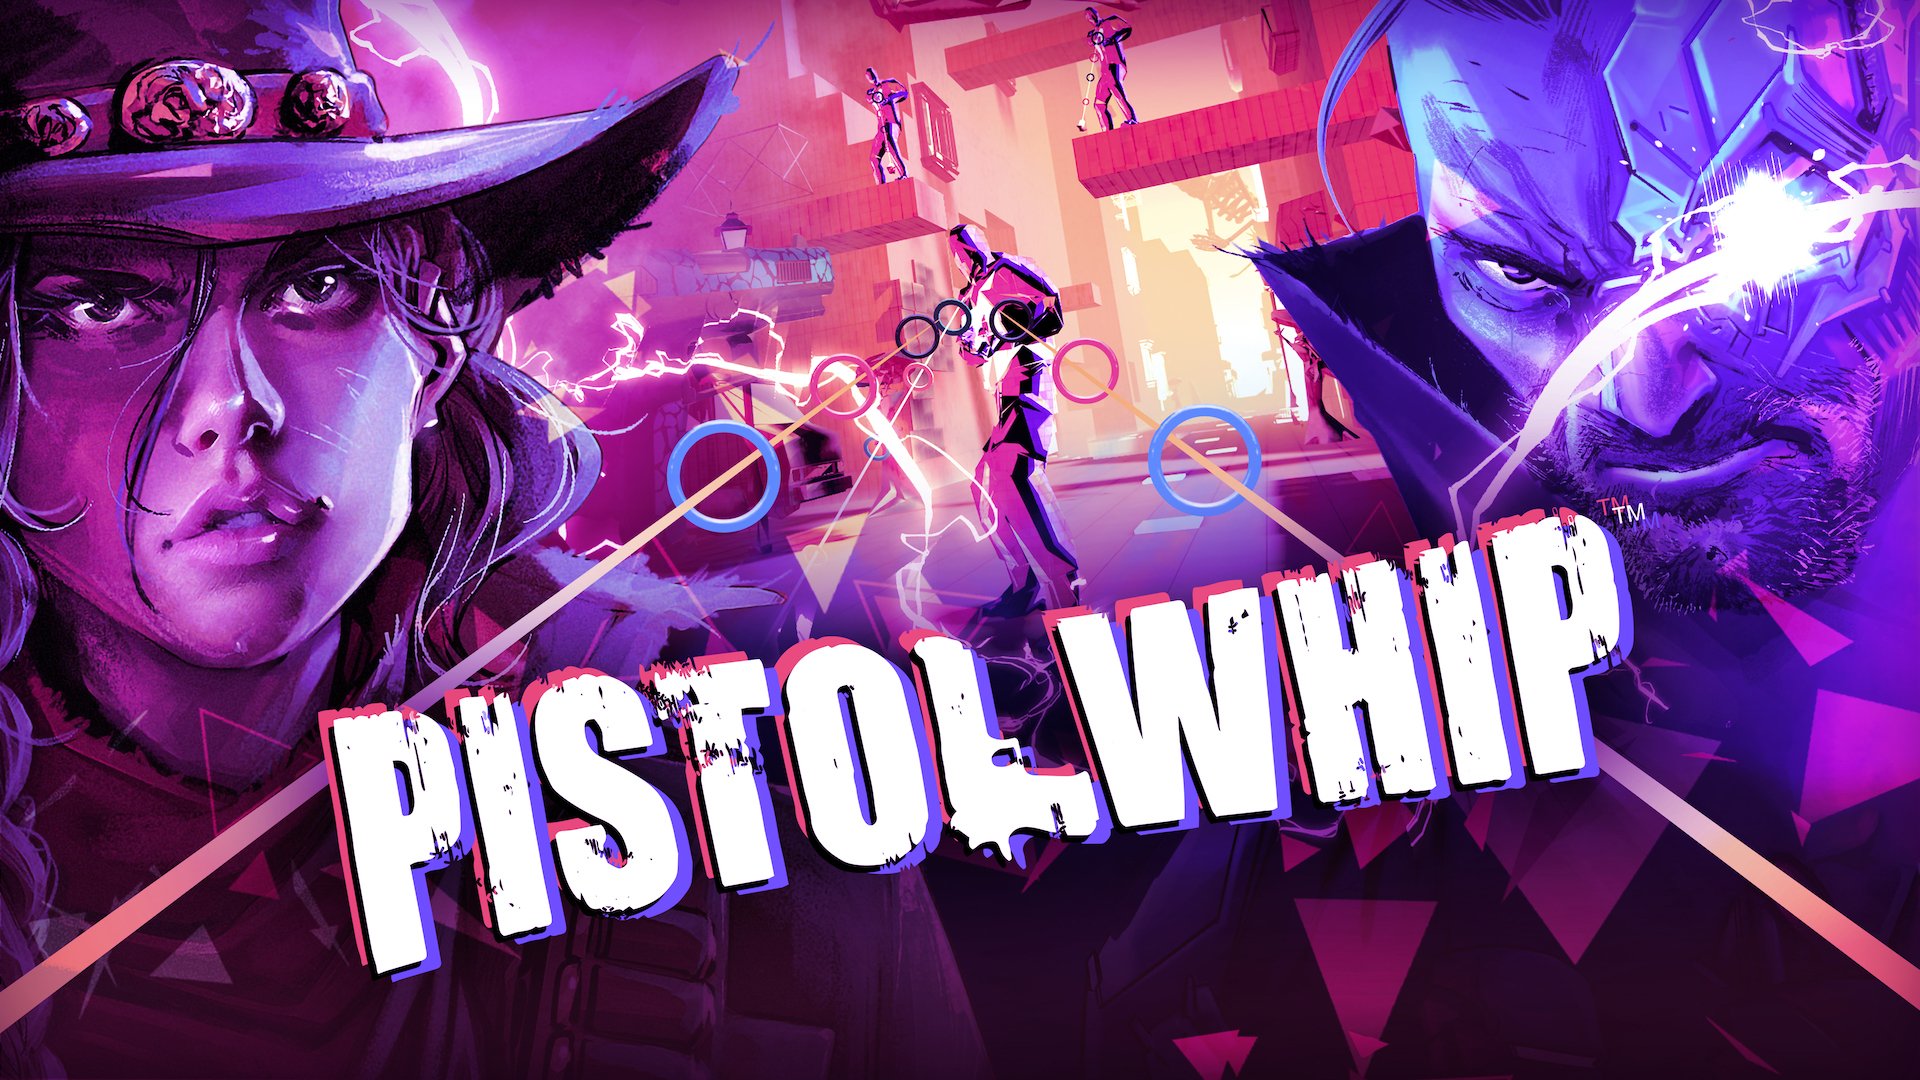 Pistol Whip "Holiday Update" brings many improvements